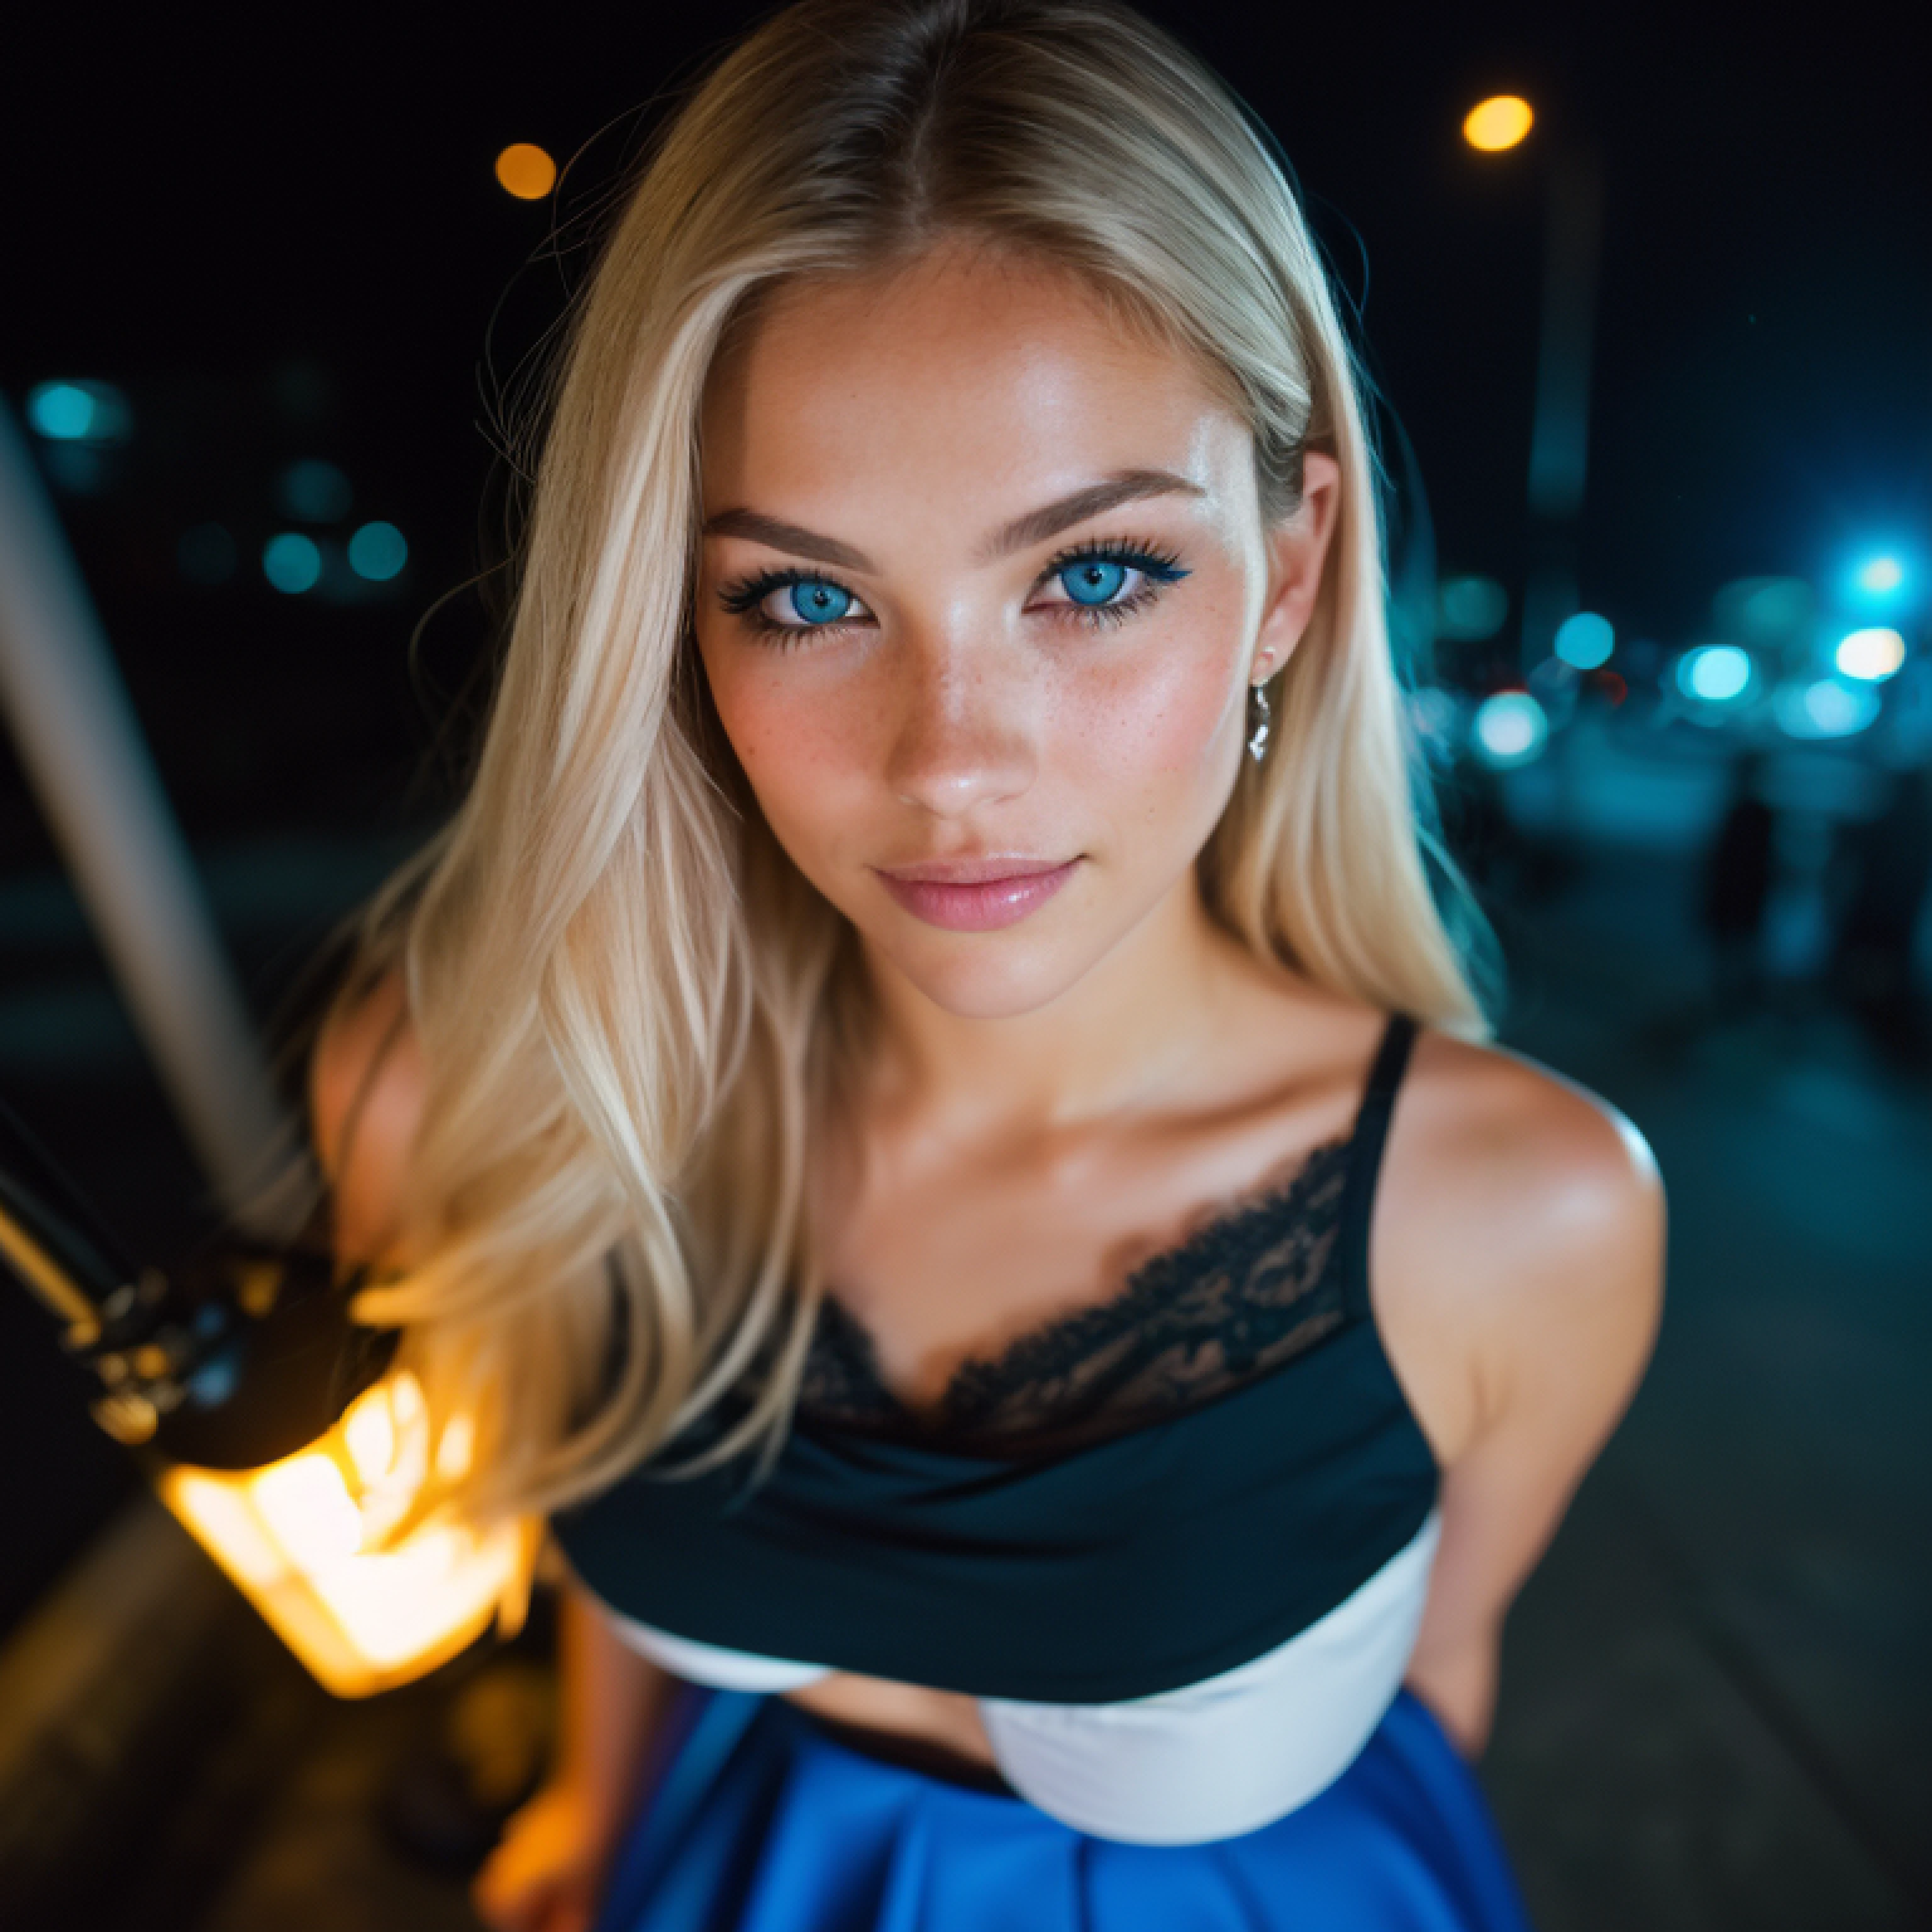 (selfie, top view: 1.4), (straight half of the body: 1.4), RAW UHD portrait photo of a 24-year-old blonde (blue-eyed woman) walking down a dark alley, large breasts,, city at night, (skirt), (neckline), details (textures! , hair! , glitter, color!! , disadvantages: 1.1), glossy eyes with high detail (looking at the camera), SLR lighting, SLR camera, ultra-quality, sharpness, depth of field, film grain (center), Fujifilm XT3, crystal clear, frame center, beautiful face, sharp focus, street lamp, neon lighting, bokeh (dimly lit), night, (night sky), detailed skin pores, oily skin, sunburn, complex eye details, full body, large breasts